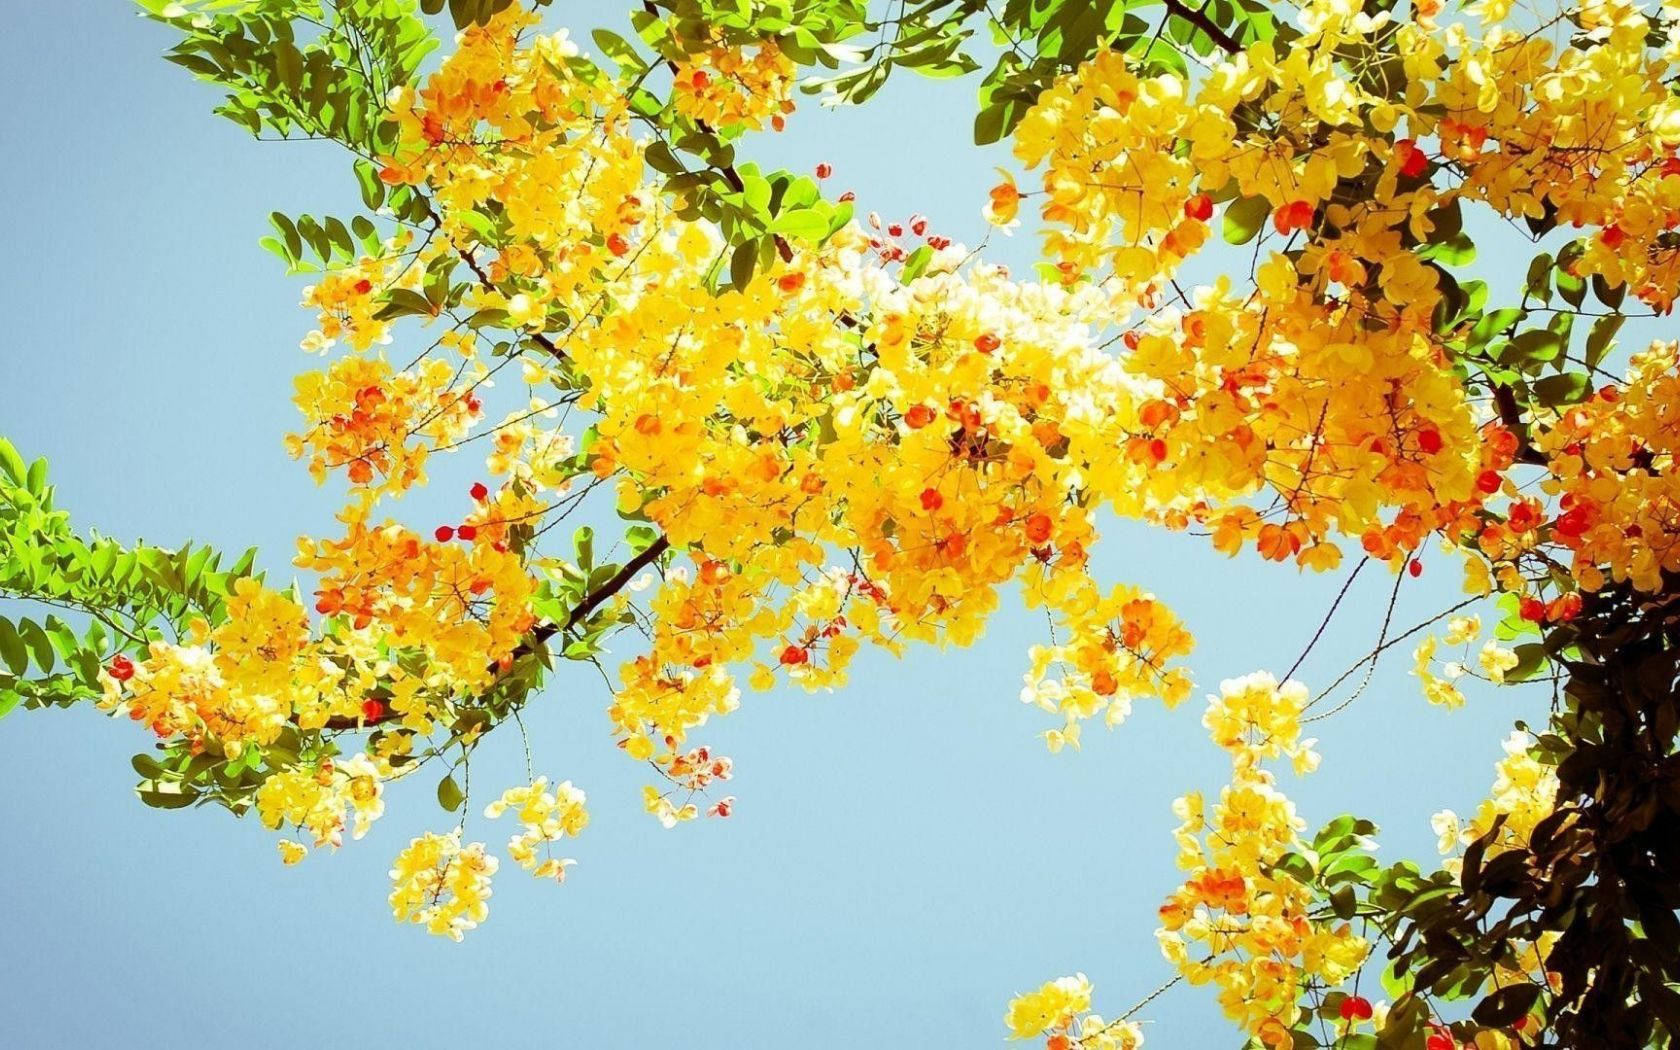 Nature Aesthetic Yellow Flowers On Tree For Computer Background